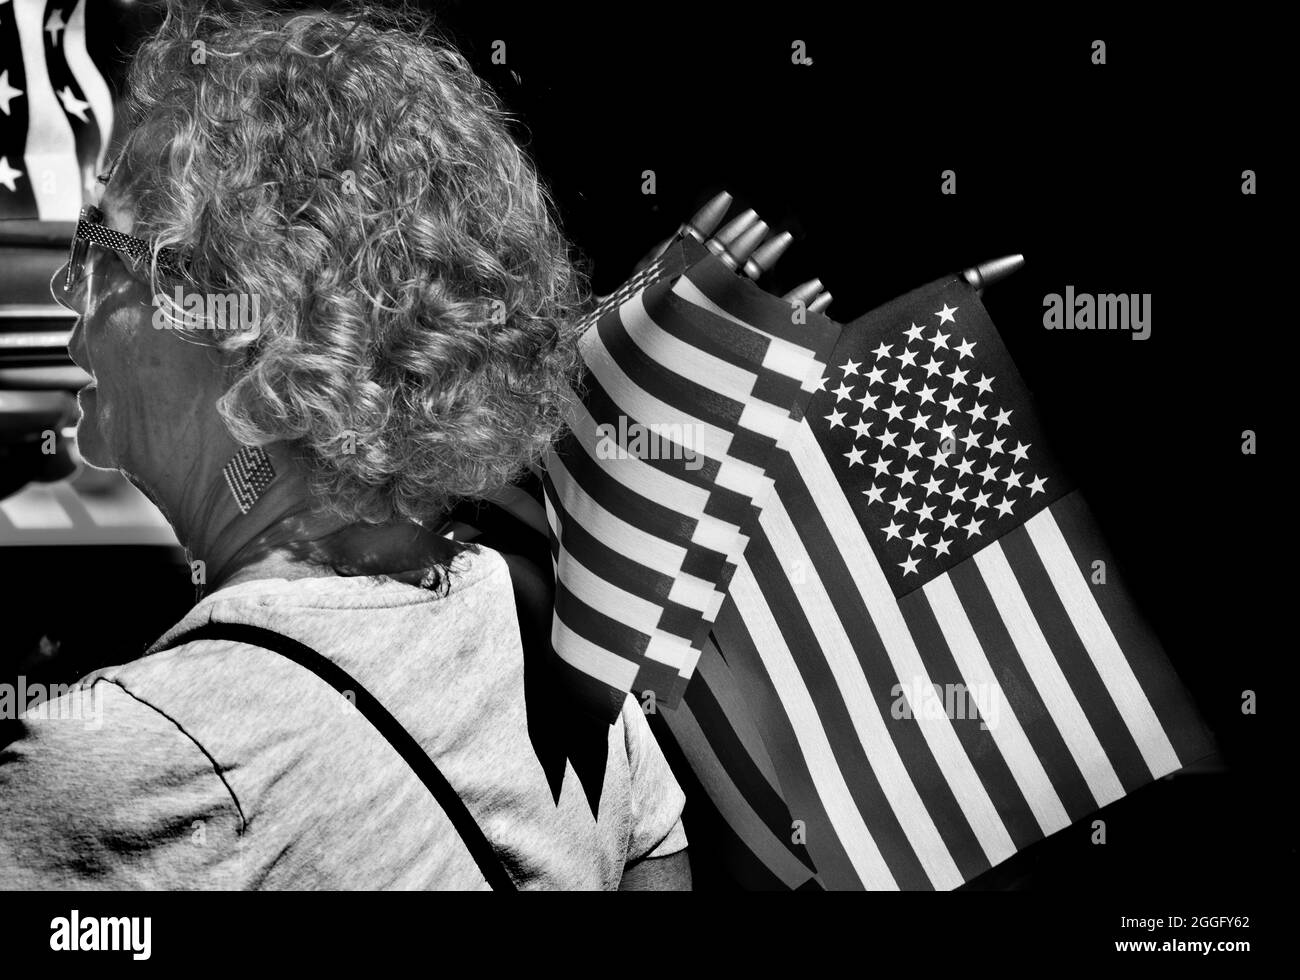 A woman distributes small American flags at a Fourth of July vintage car show in Santa Fe, New Mexico. Stock Photo